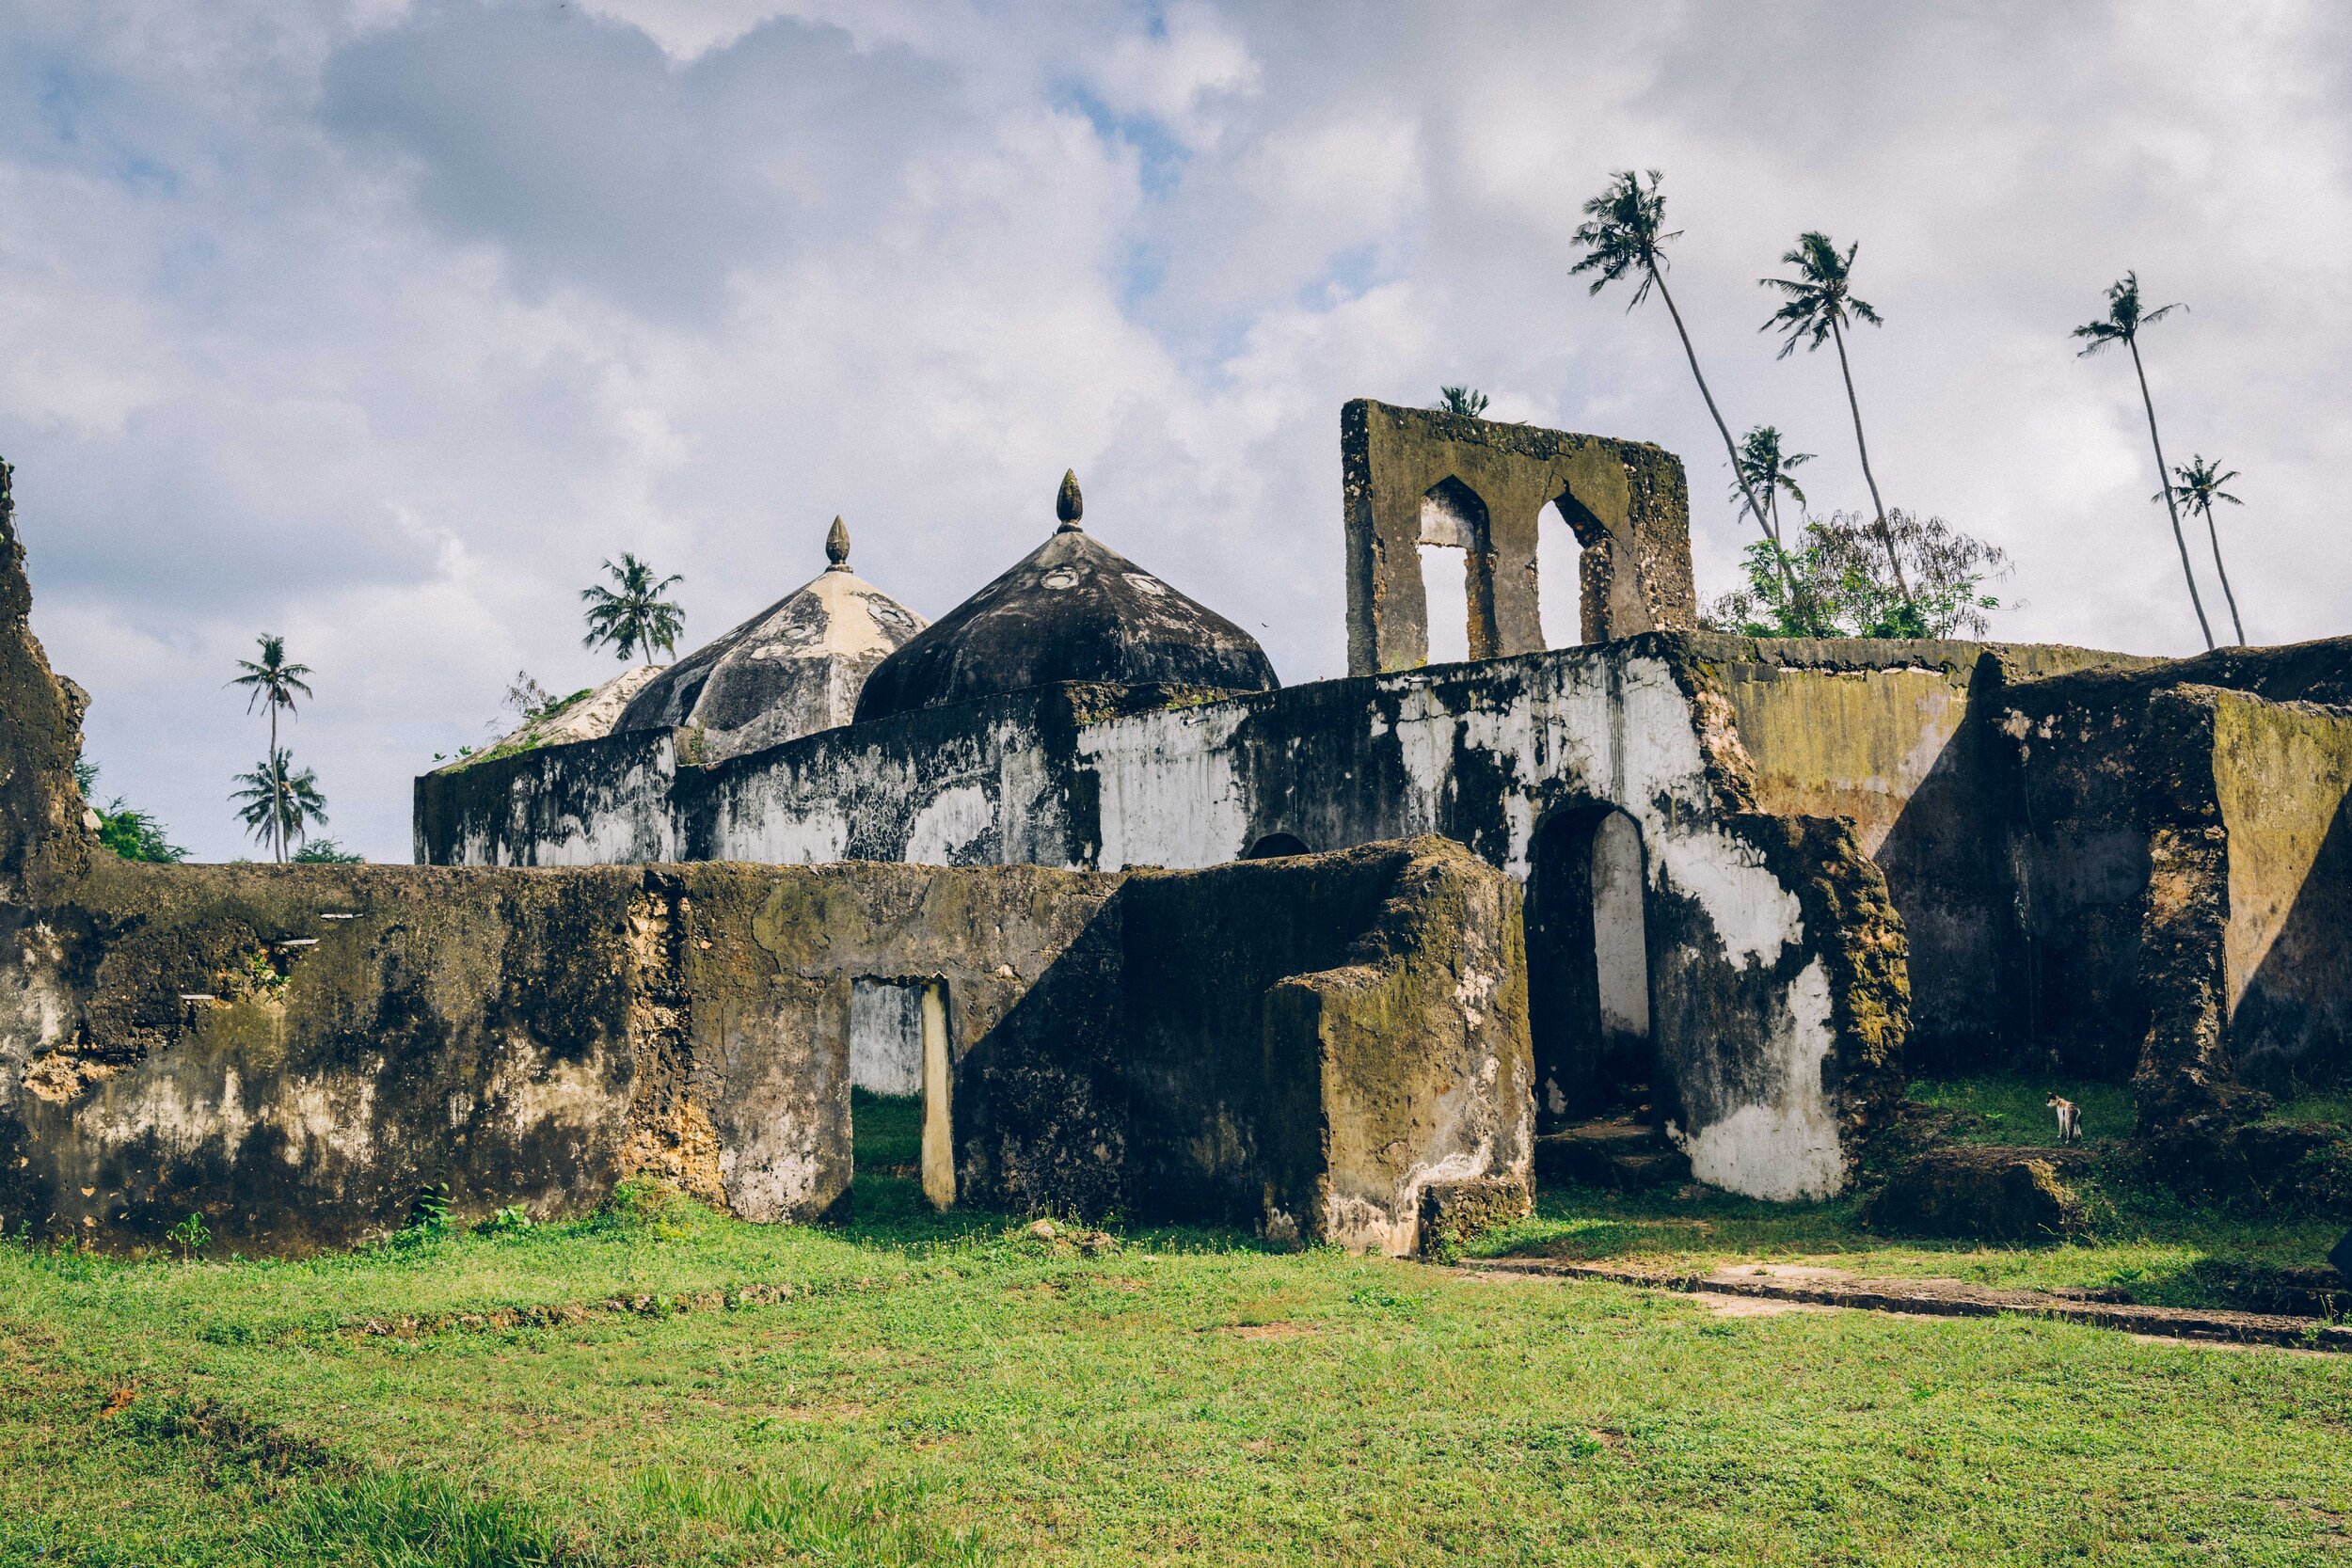  The ruins of the nearby Maruhubi palace built by the third Arab sultan of Zanzibar between 1880-1882. 